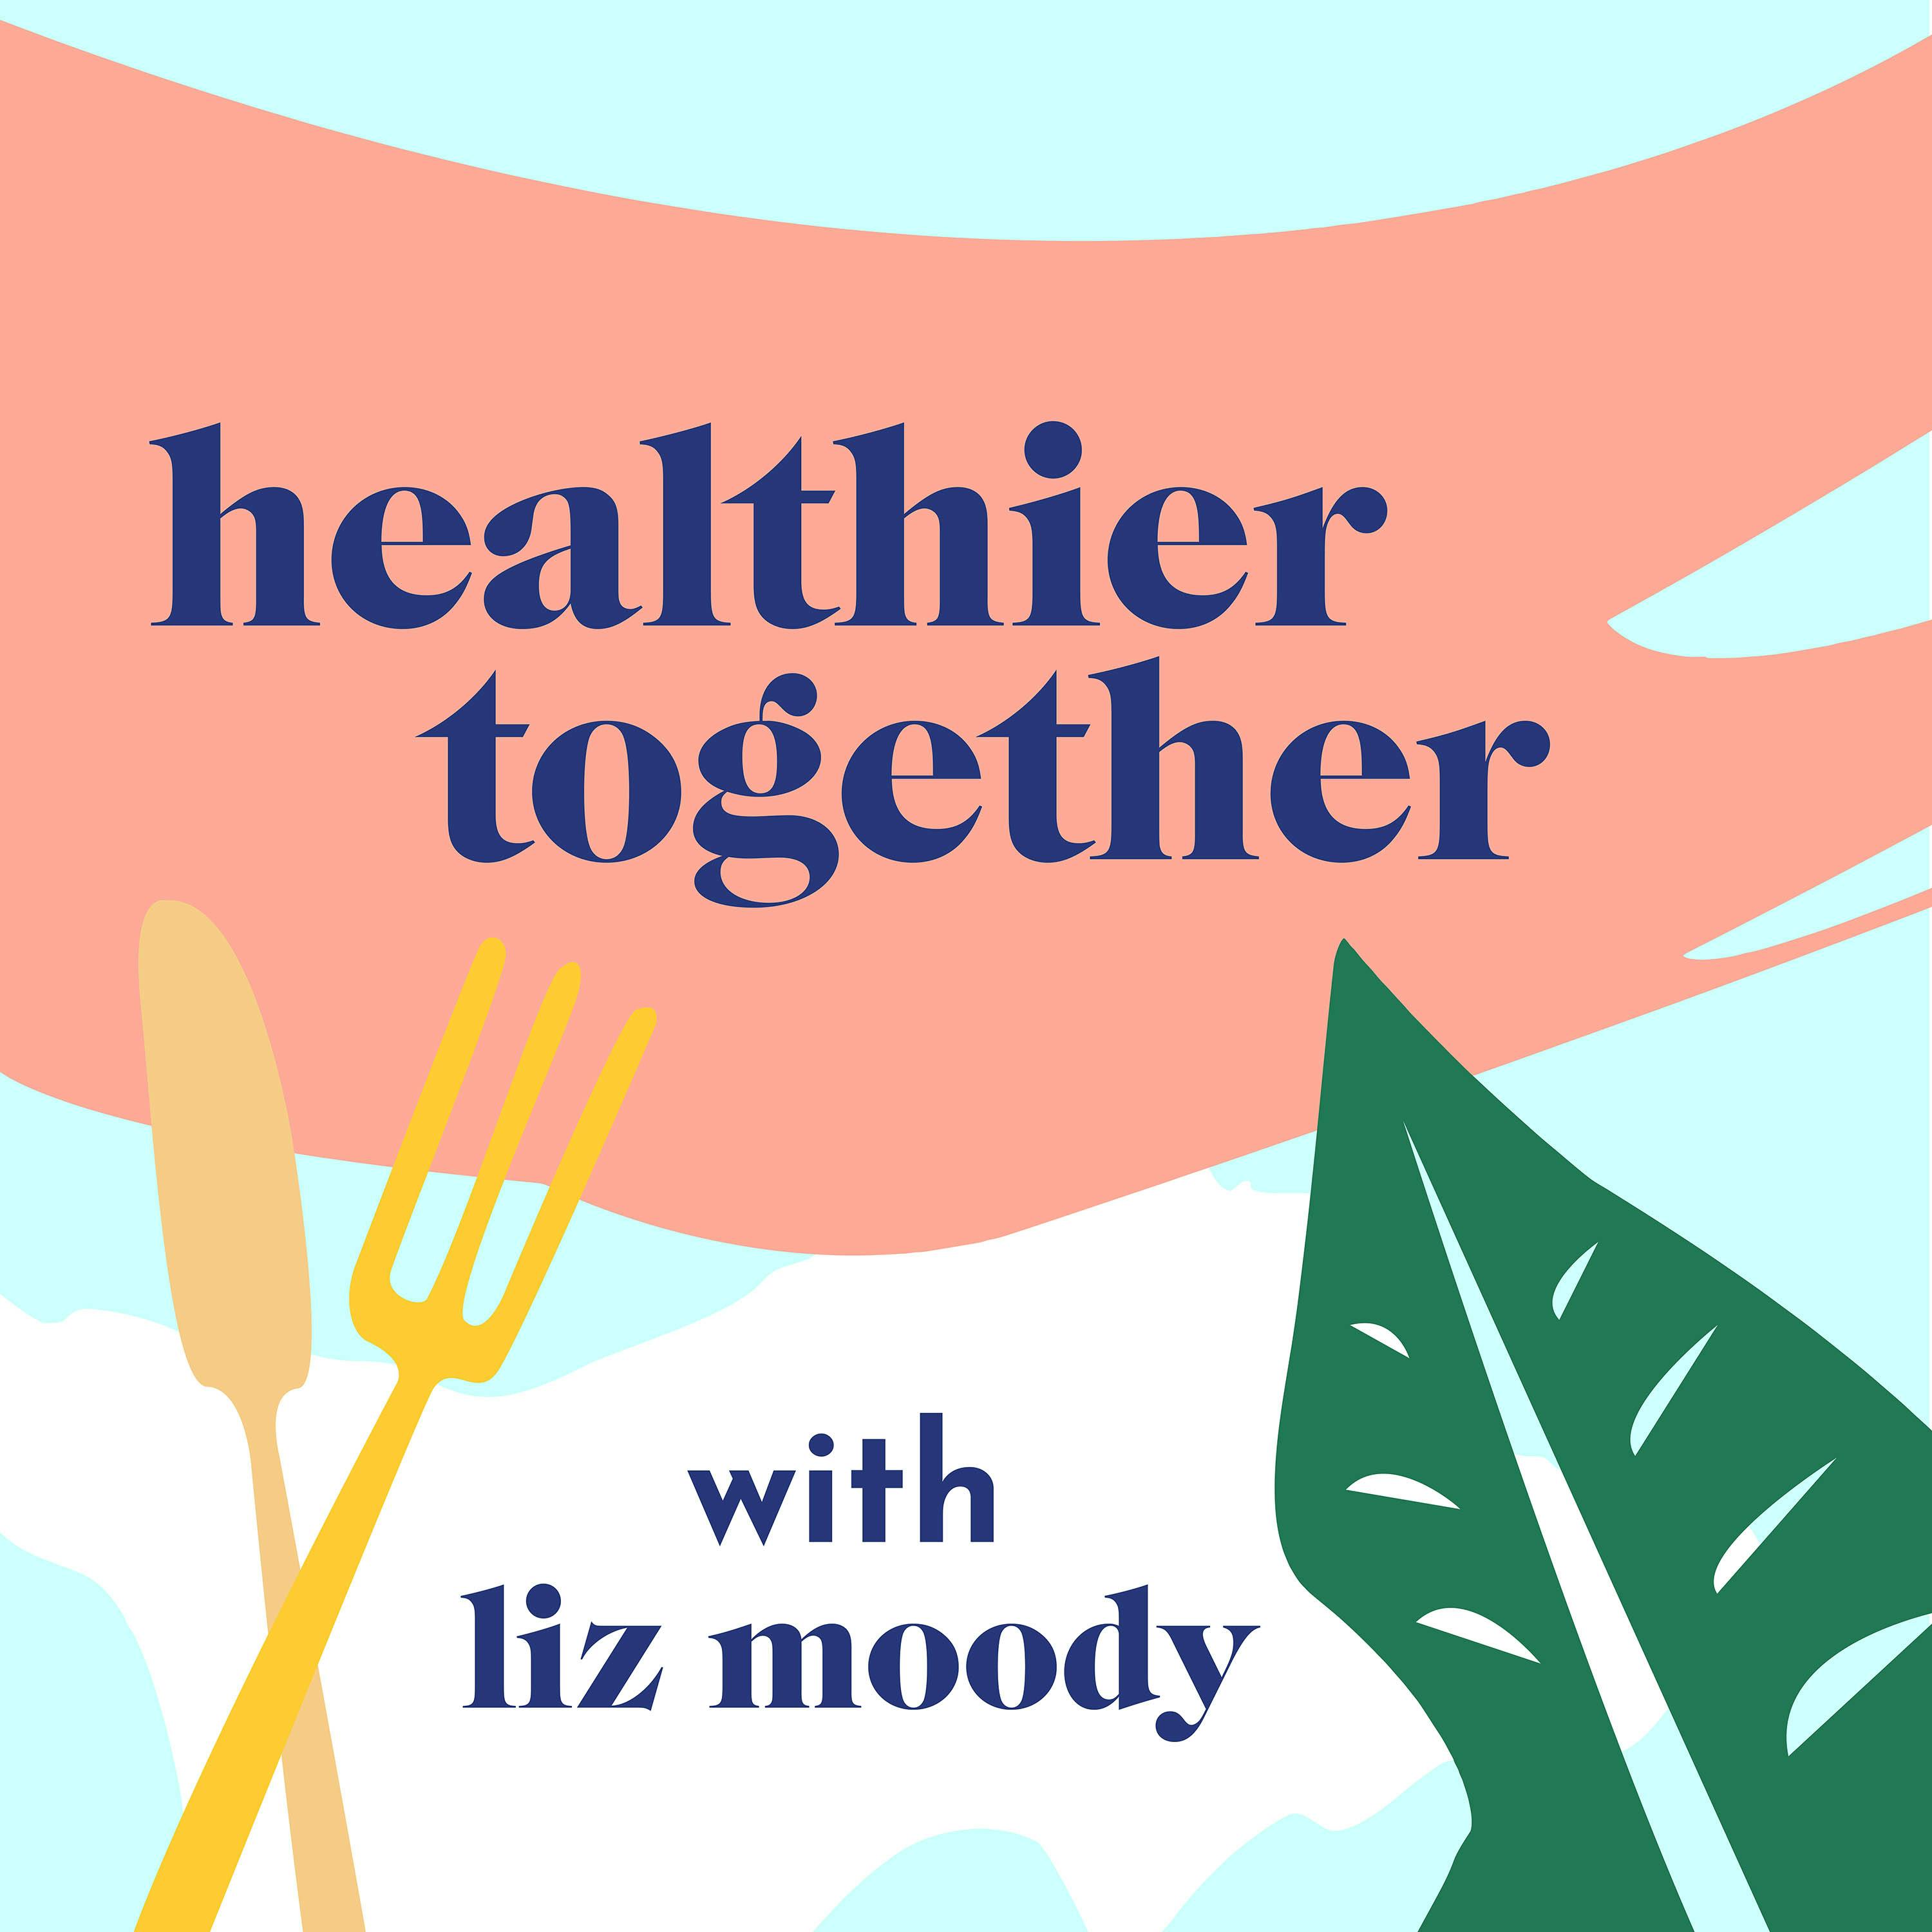 How To Have More Fun: Hidden Health Benefits, Becoming A Fun Magnet, & Phone Breakup Tips With Catherine Price